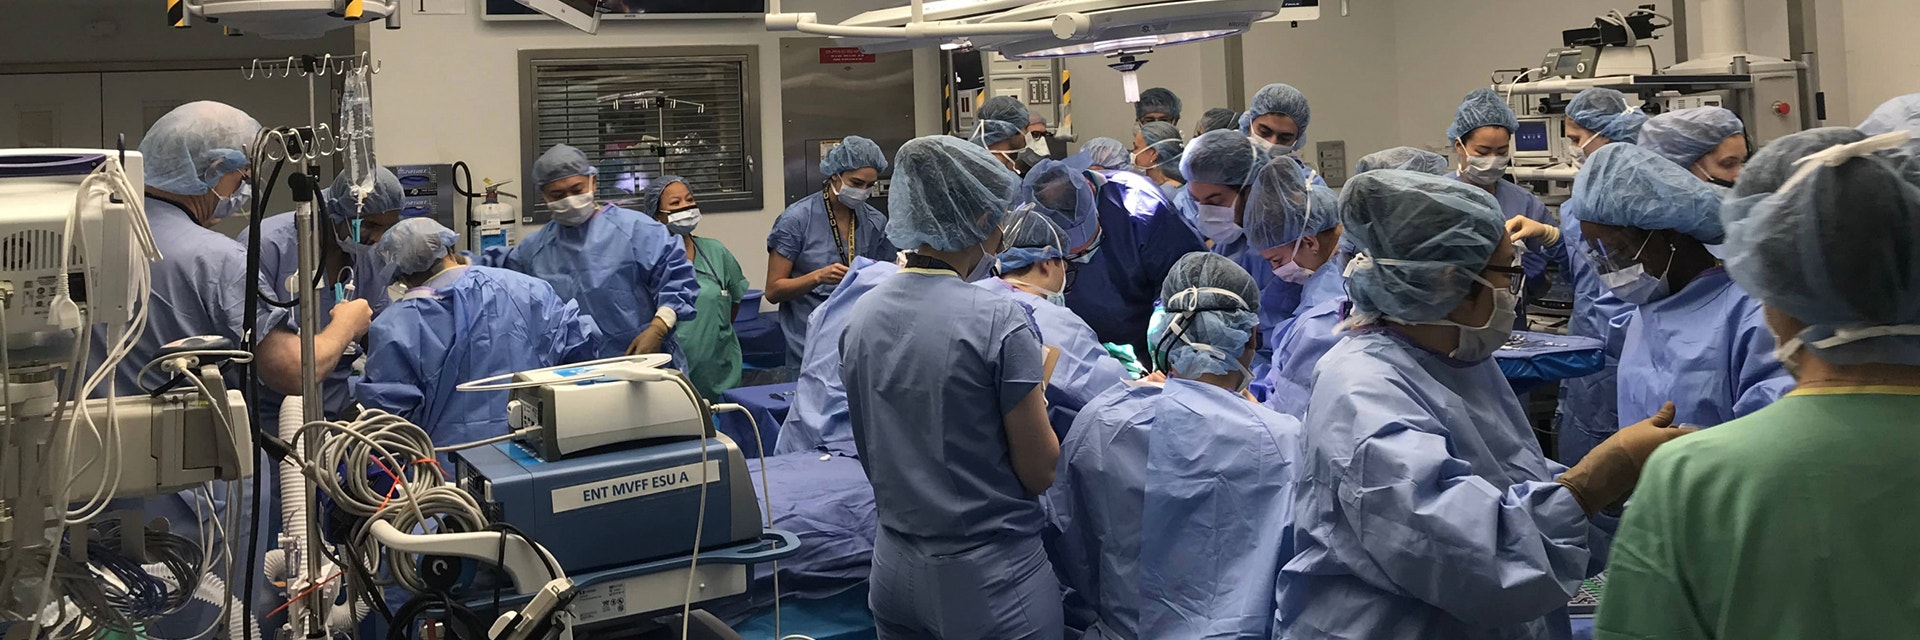 An operating room crowded with surgeons and clinicians wearing scrubs 